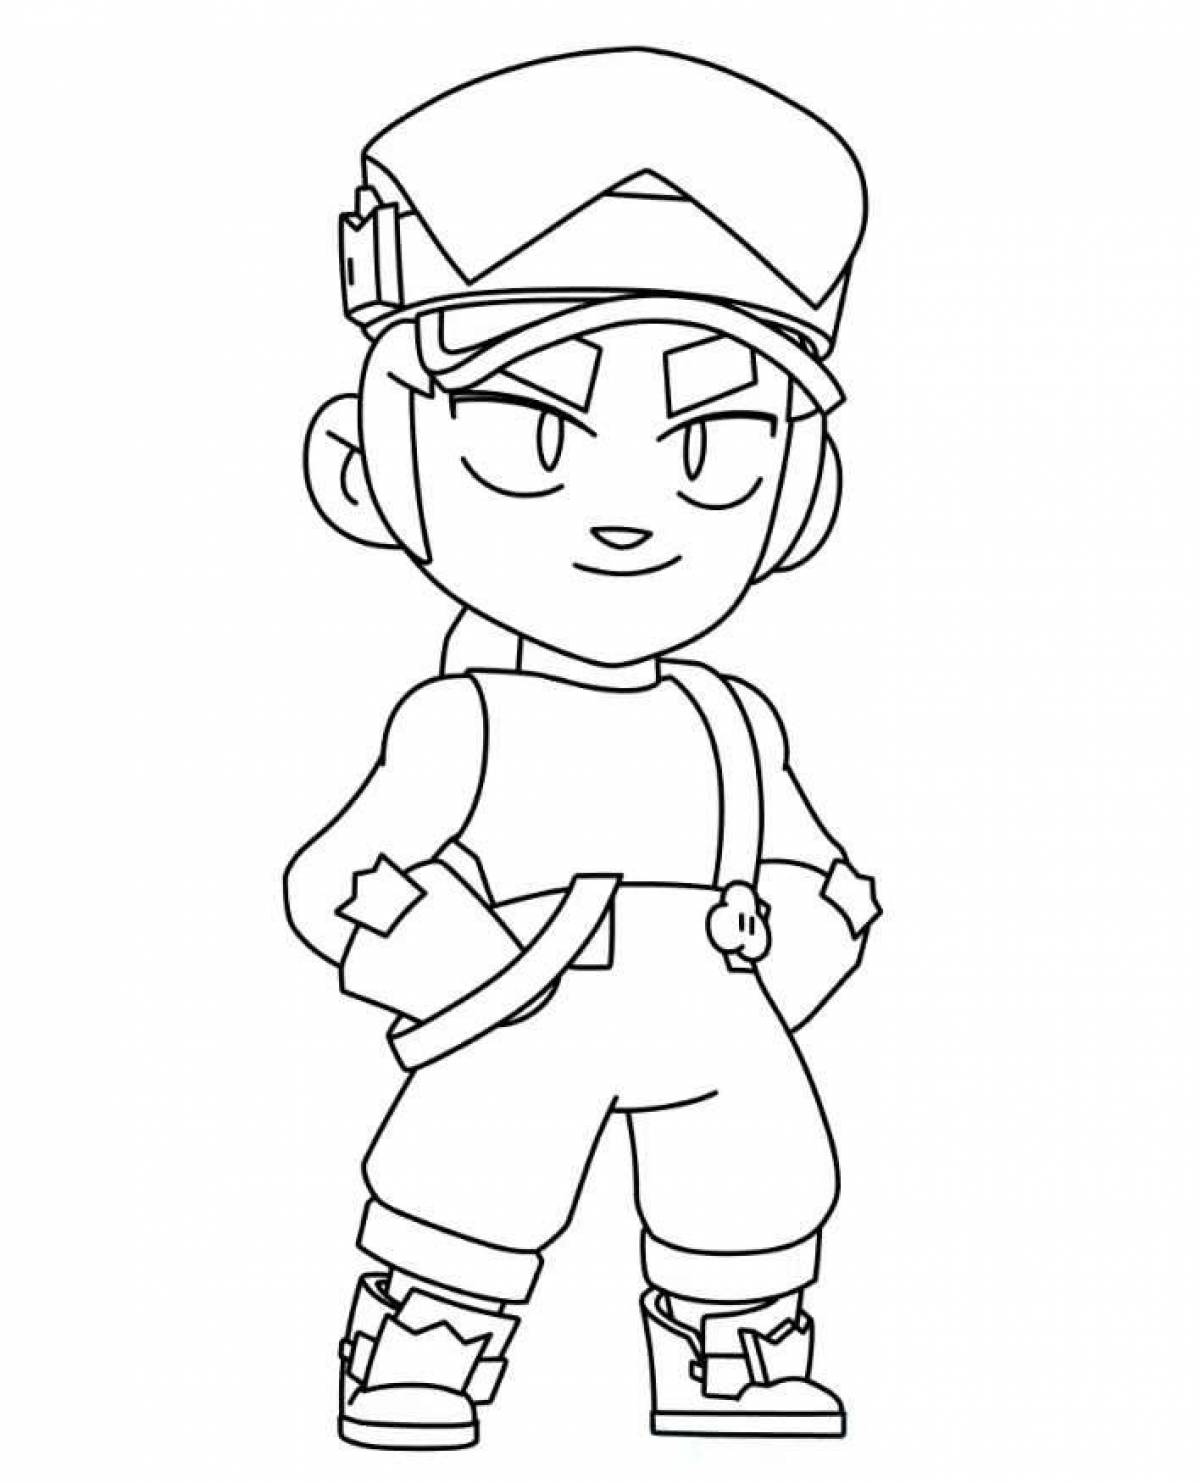 Amazing brawl stars coloring pages